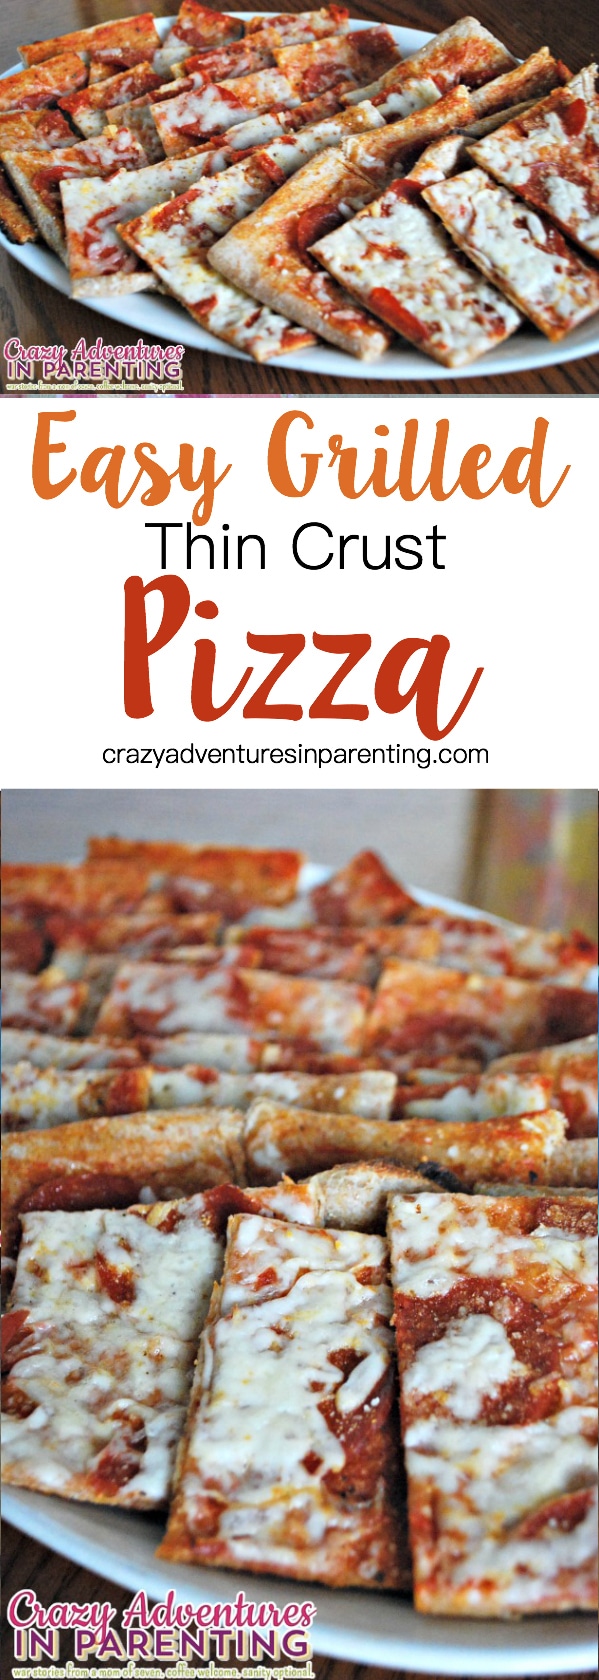 Easy Grilled Thin Crust Pizza